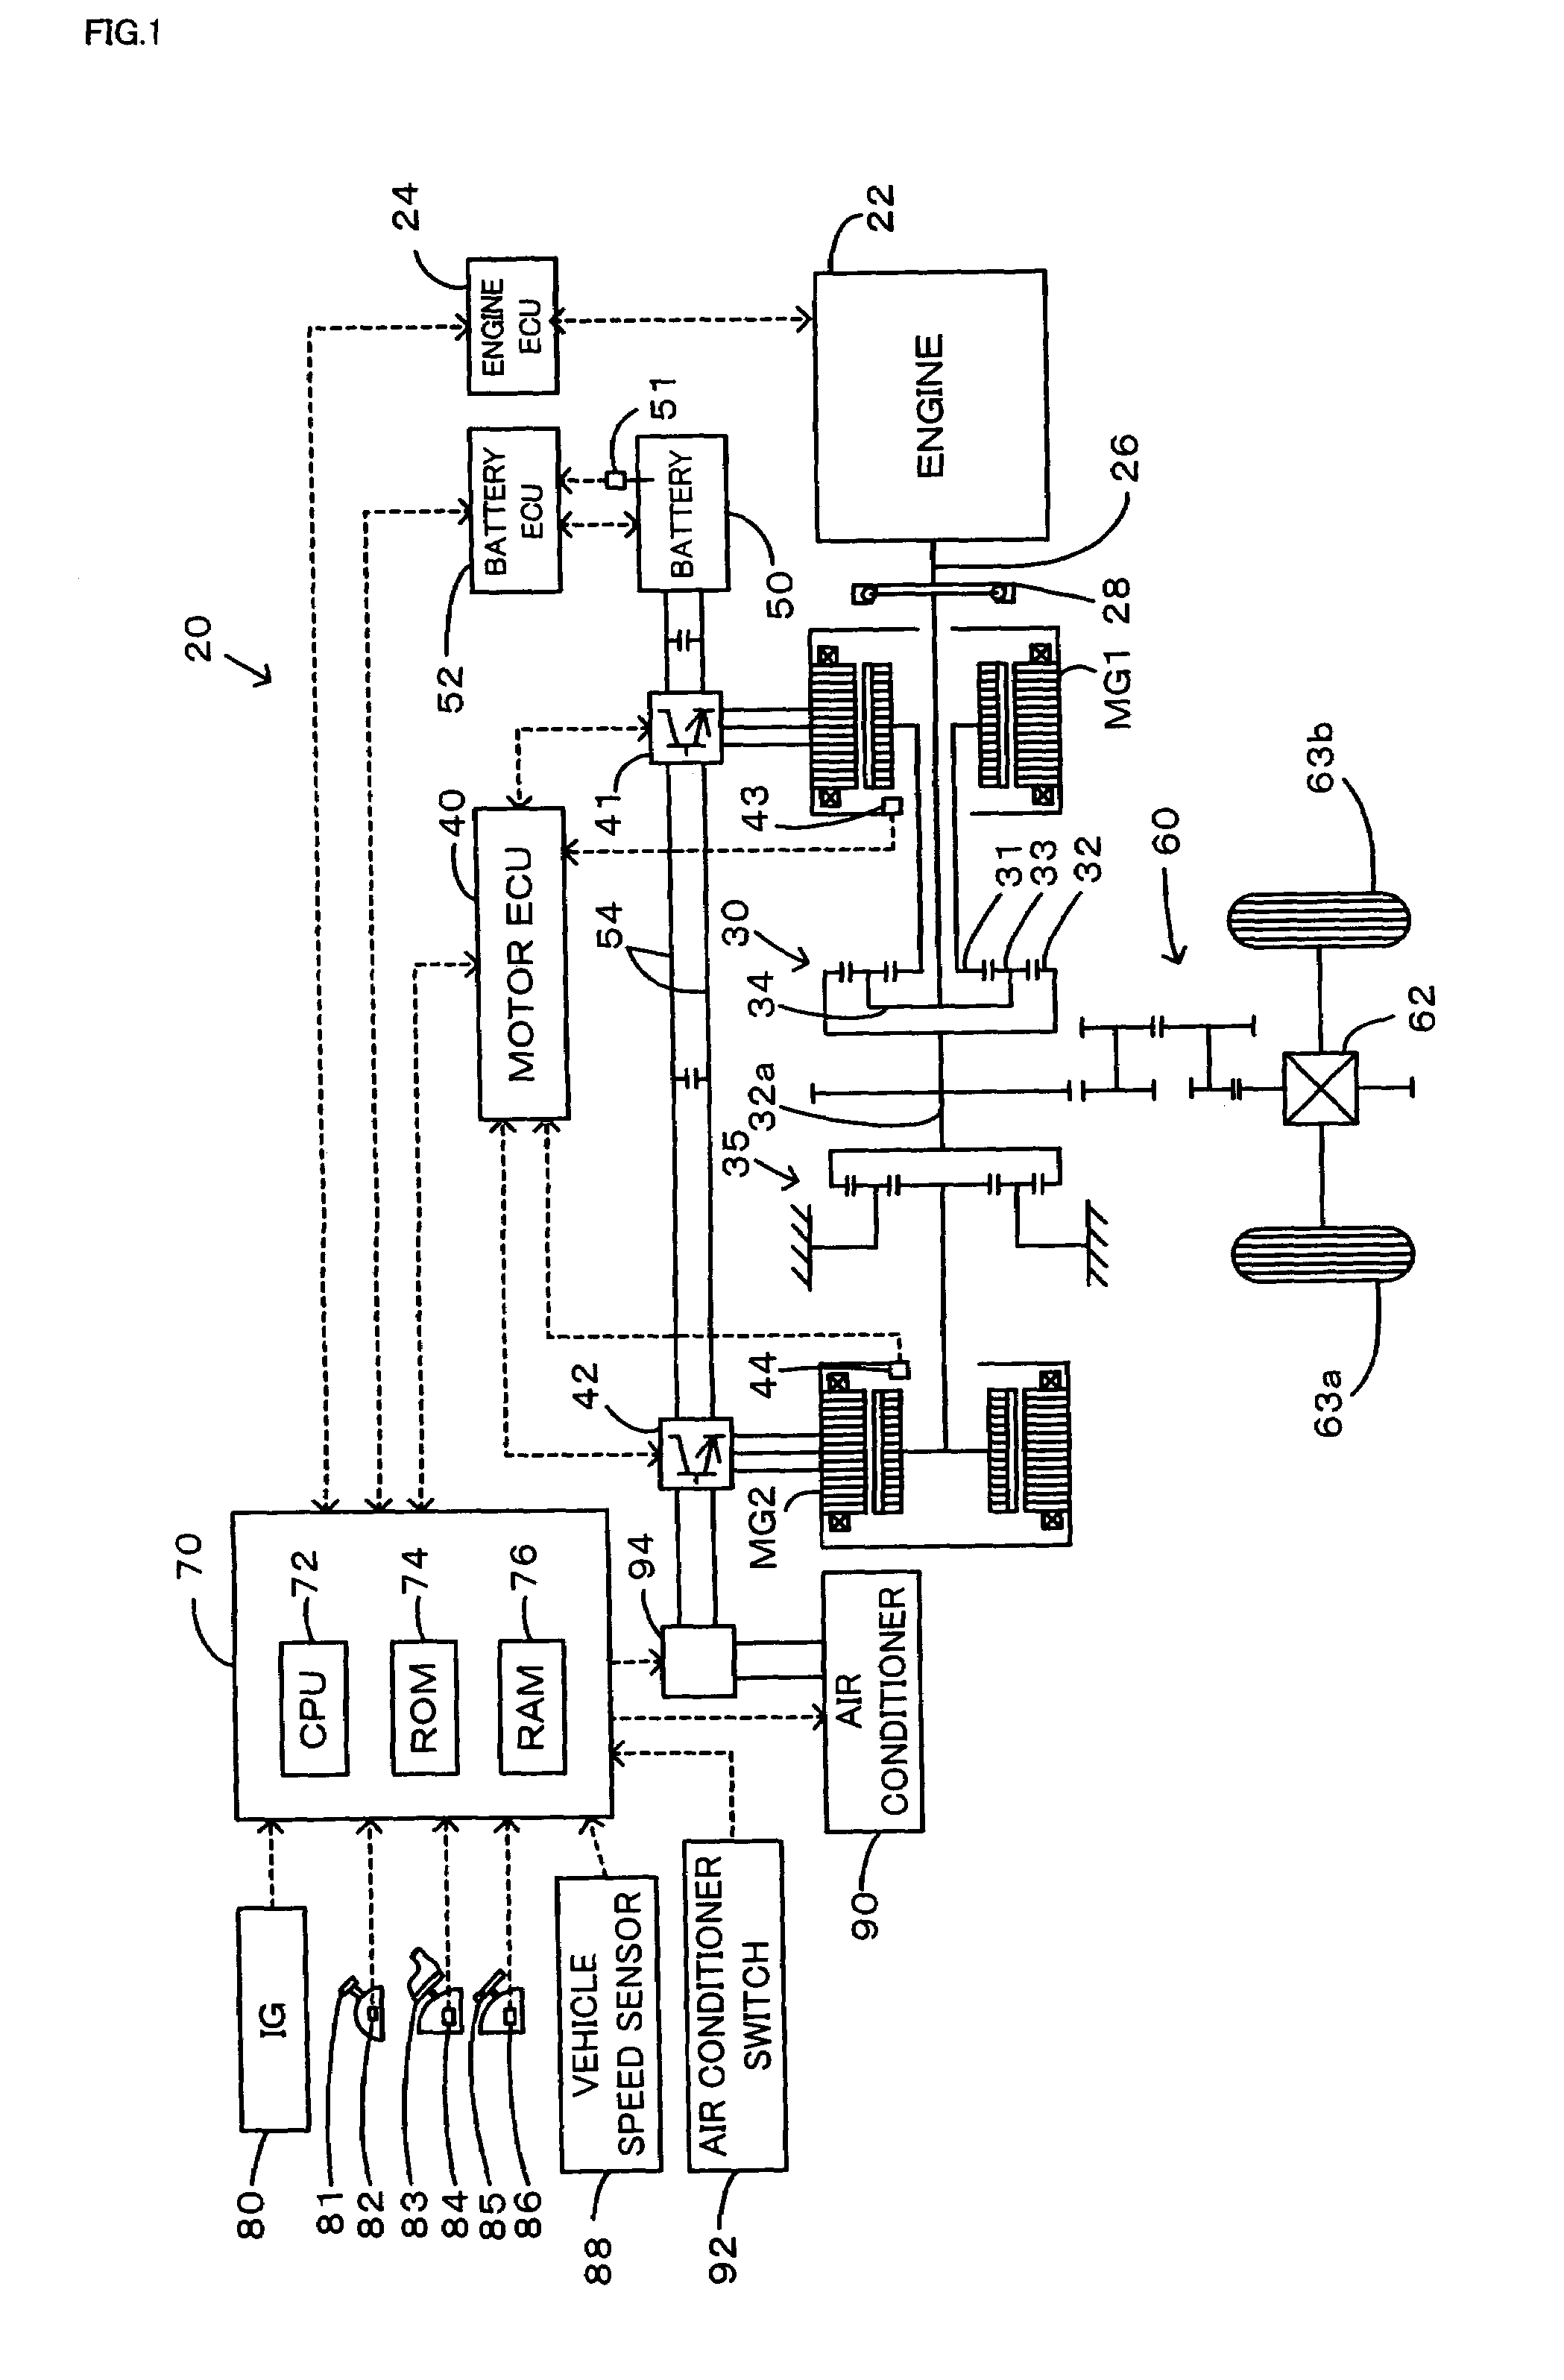 Power output apparatus, method of controlling power output apparatus, and automobile with power output apparatus mounted thereon